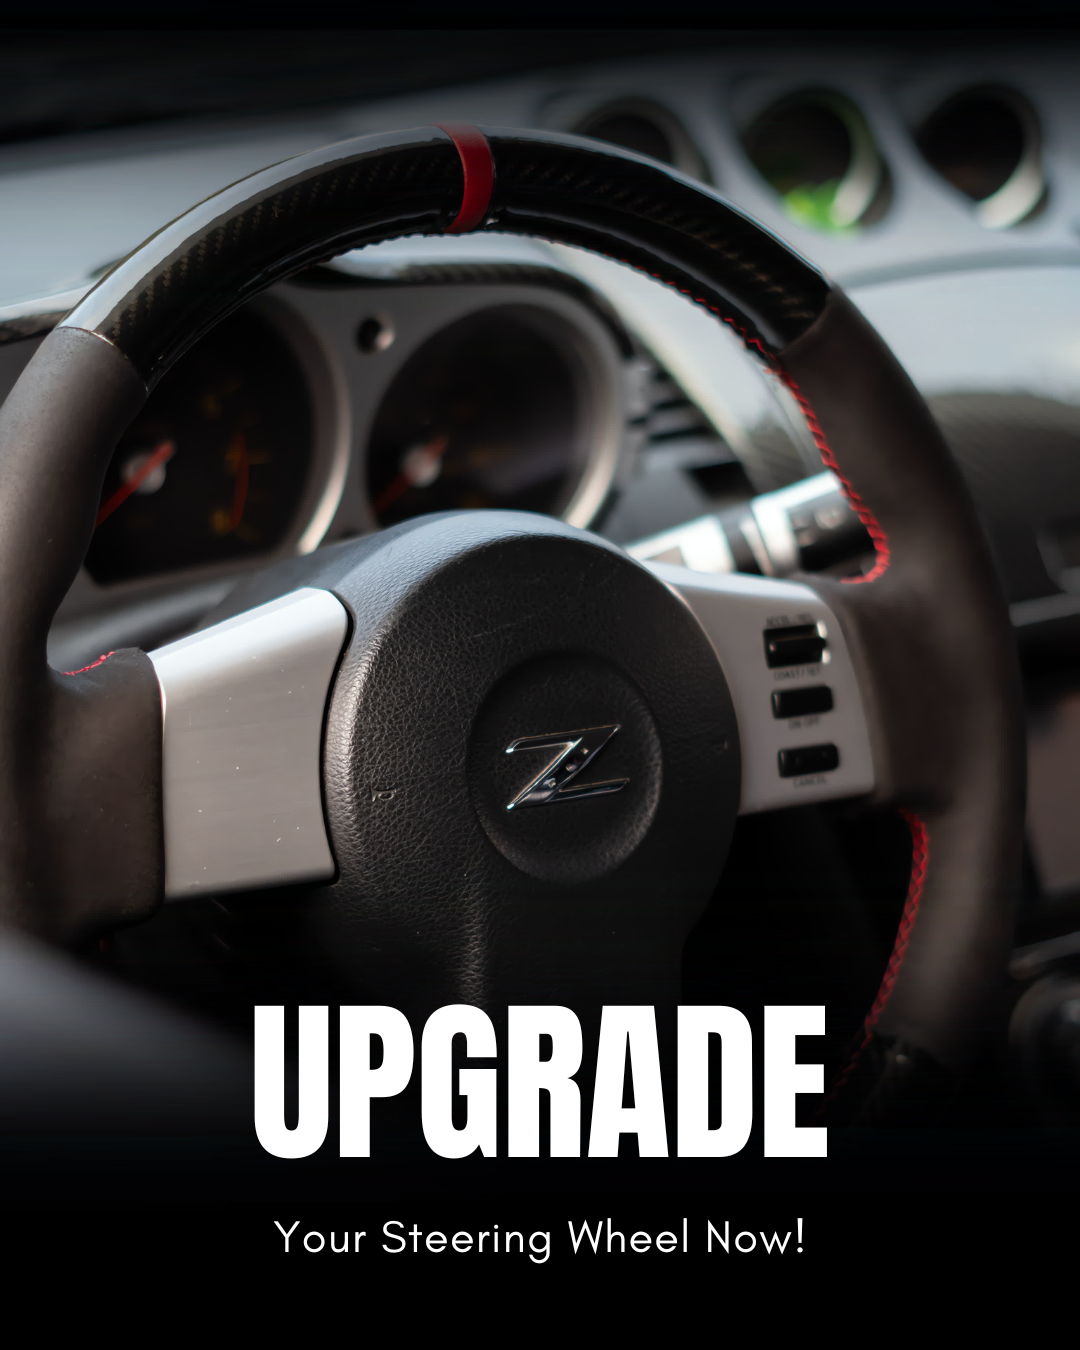 Custom black and red steering wheel cover with sporty stitching on a vehicle's steering wheel, highlighting the 'UPGRADE Your Steering Wheel Now!' text overlay.